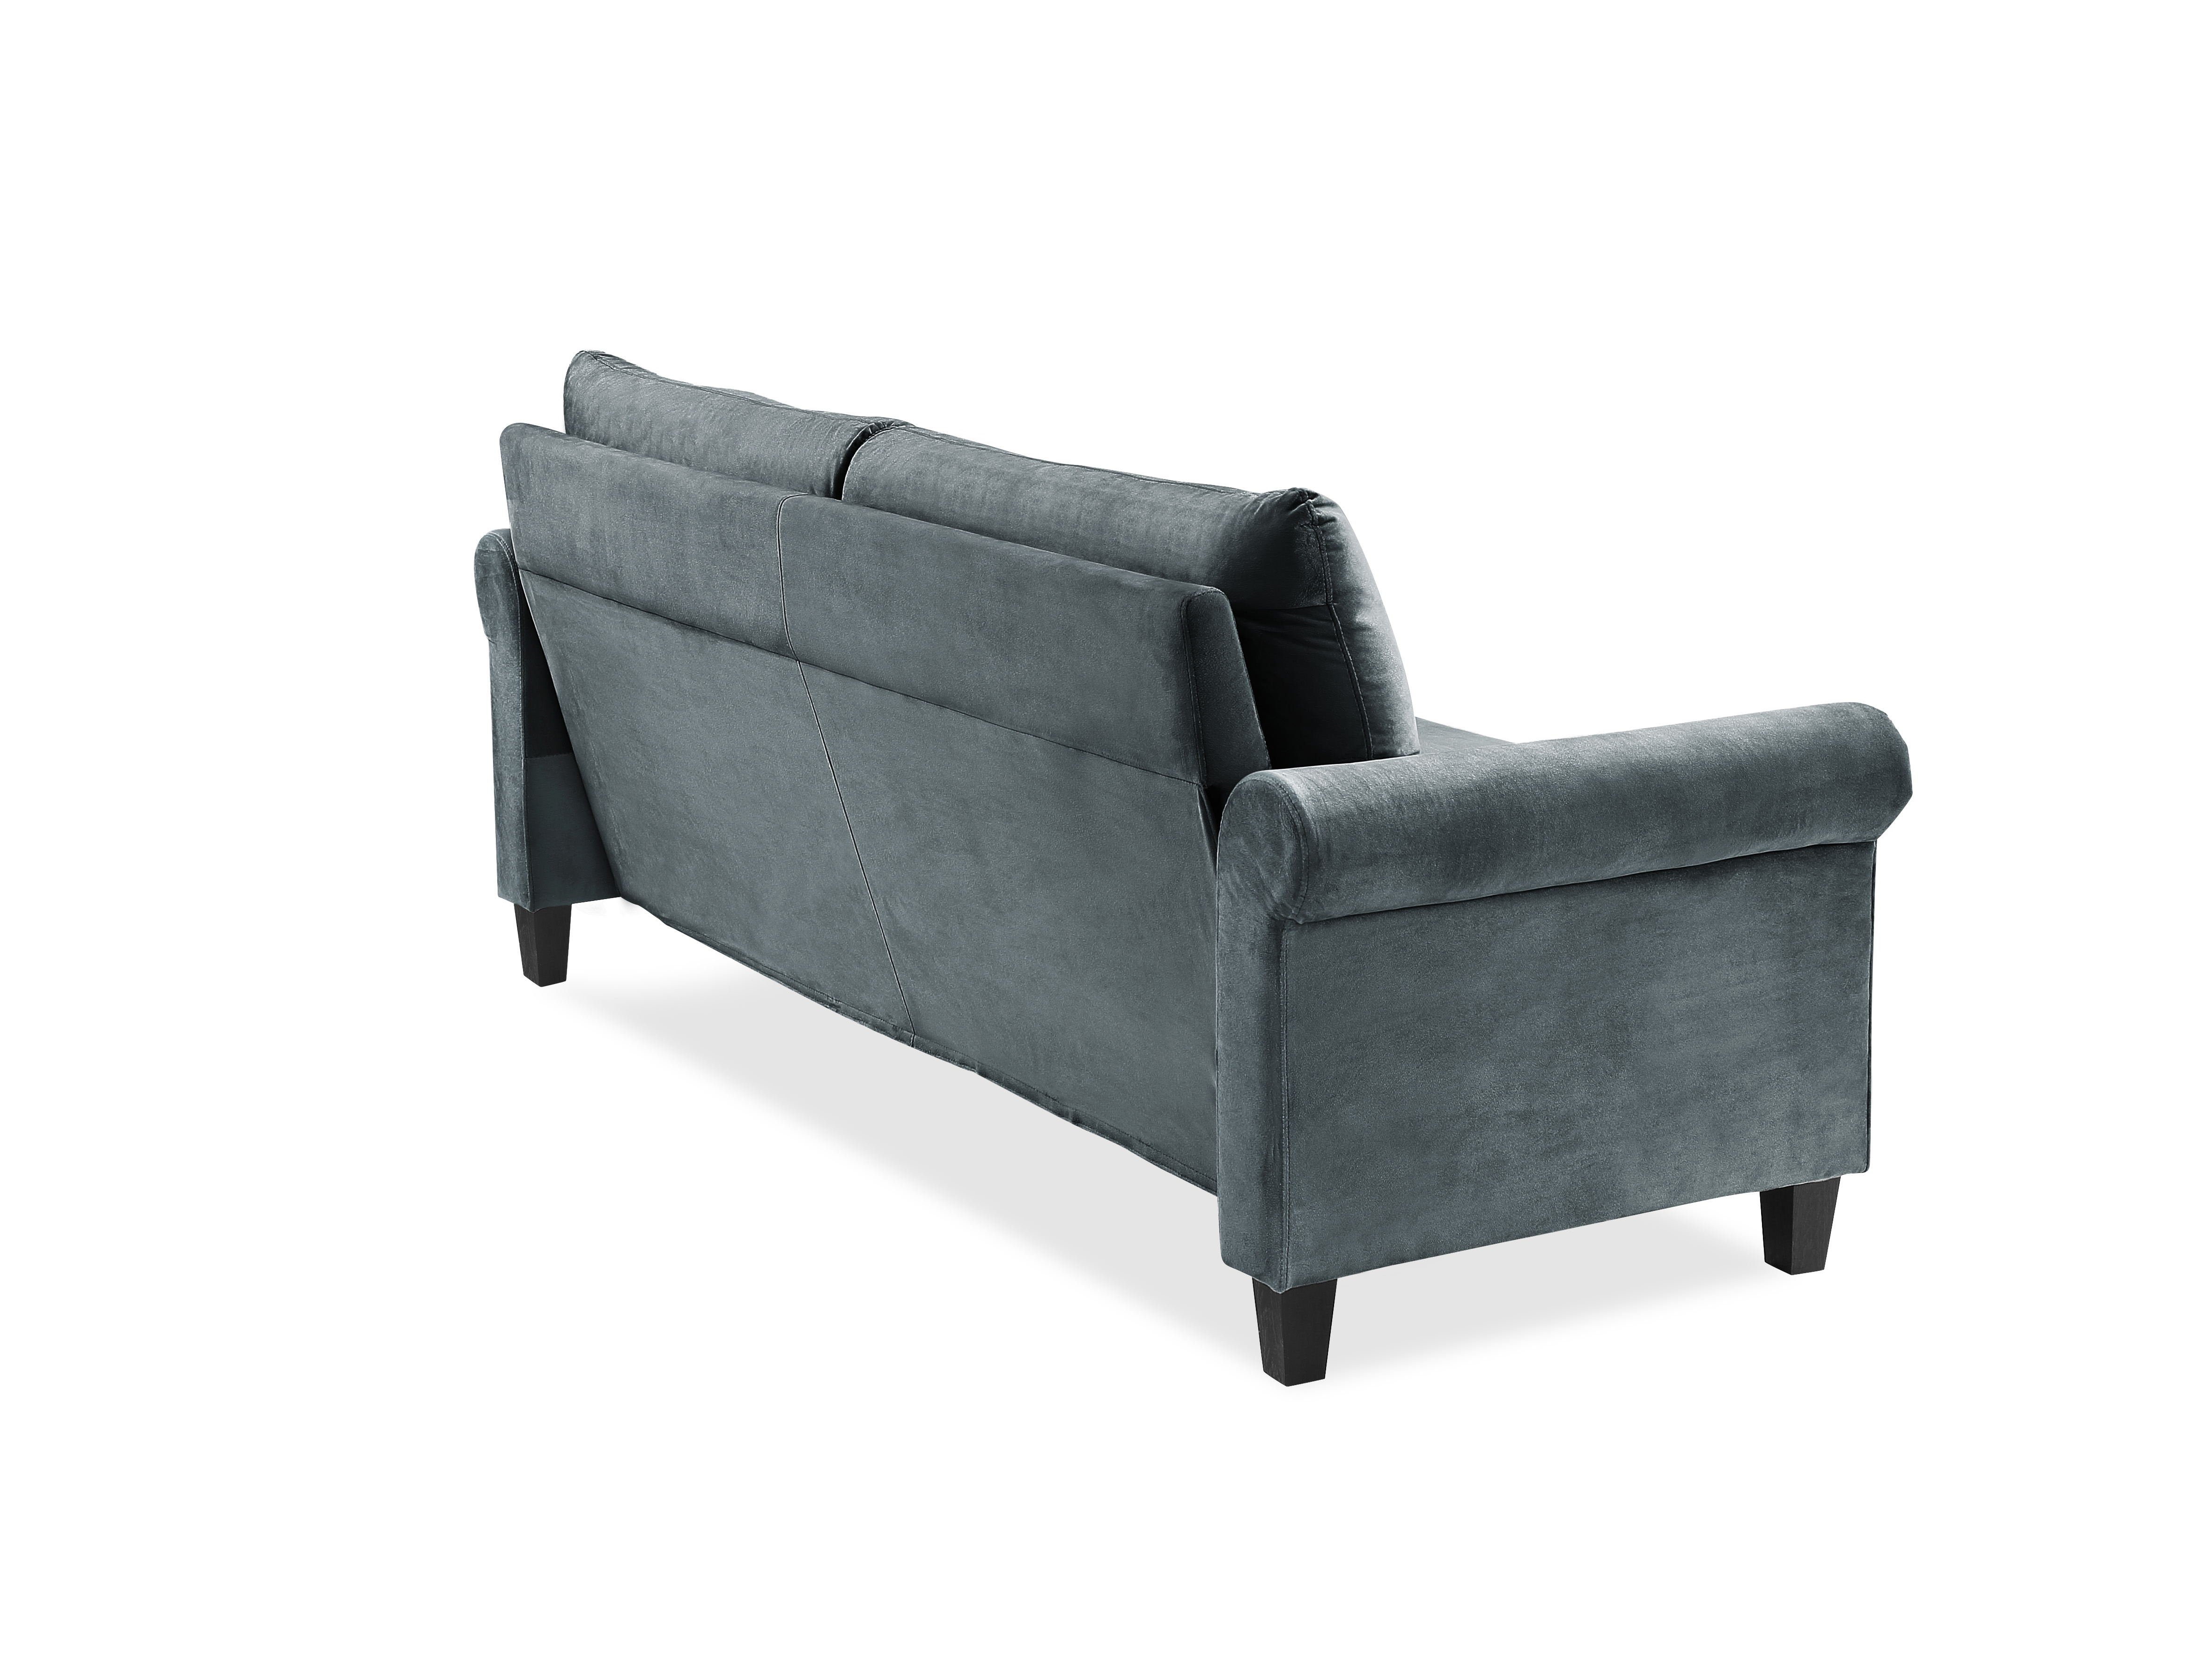 Lifestyle Solutions Fallon Rolled Arms Sofa, Gray Fabric - image 5 of 9